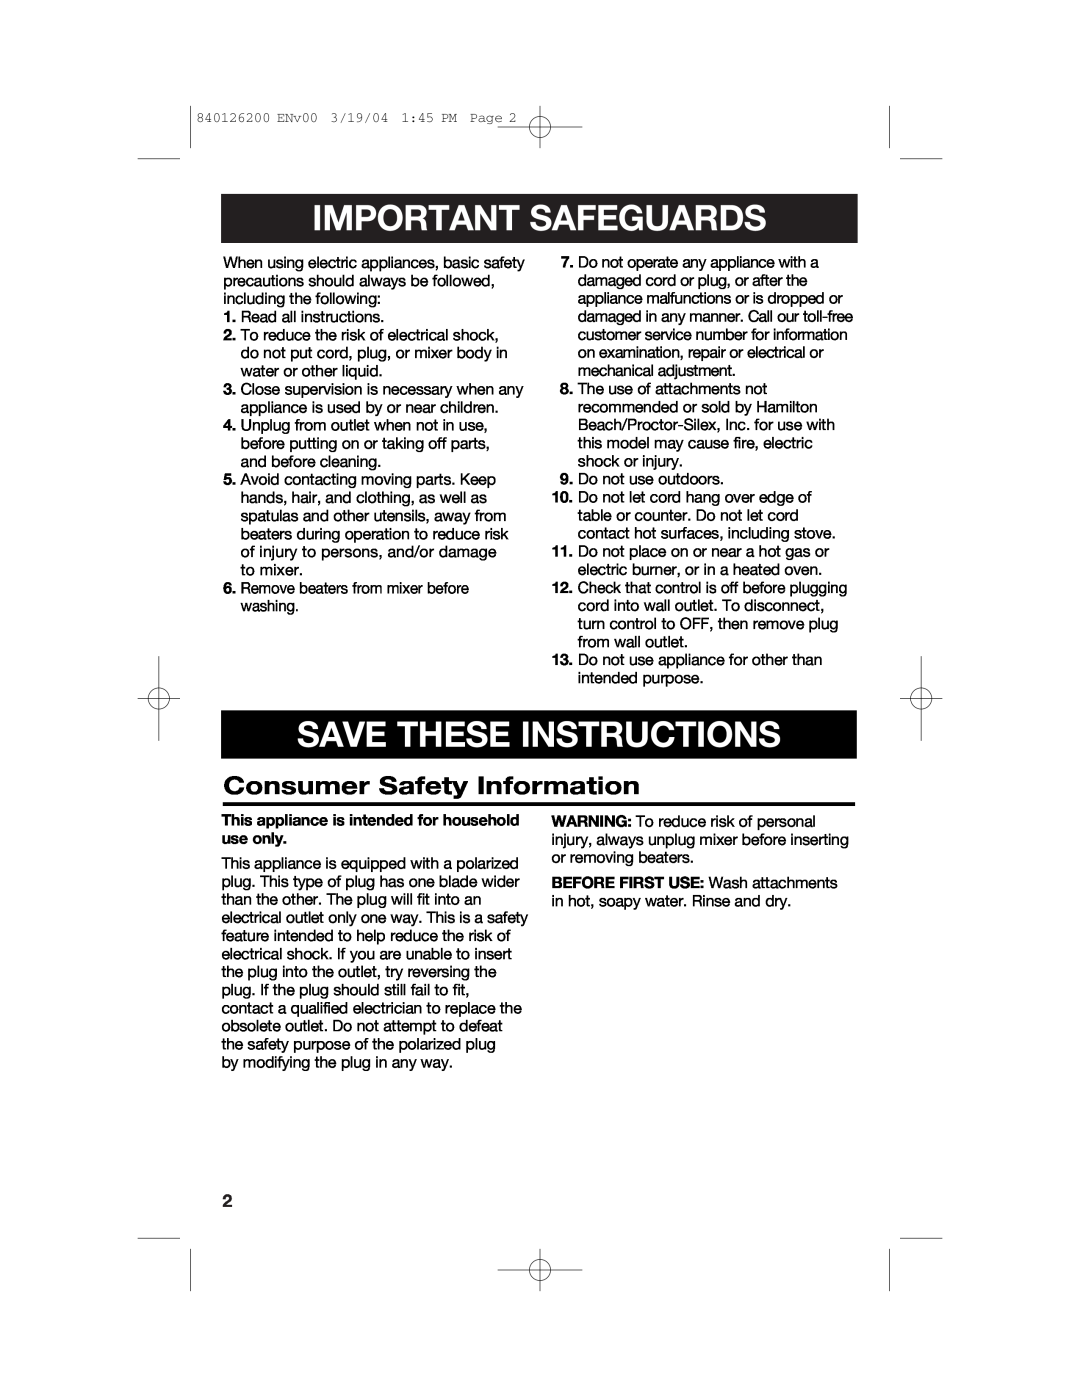 Hamilton Beach 62680C manual Consumer Safety Information, Important Safeguards, Save These Instructions 